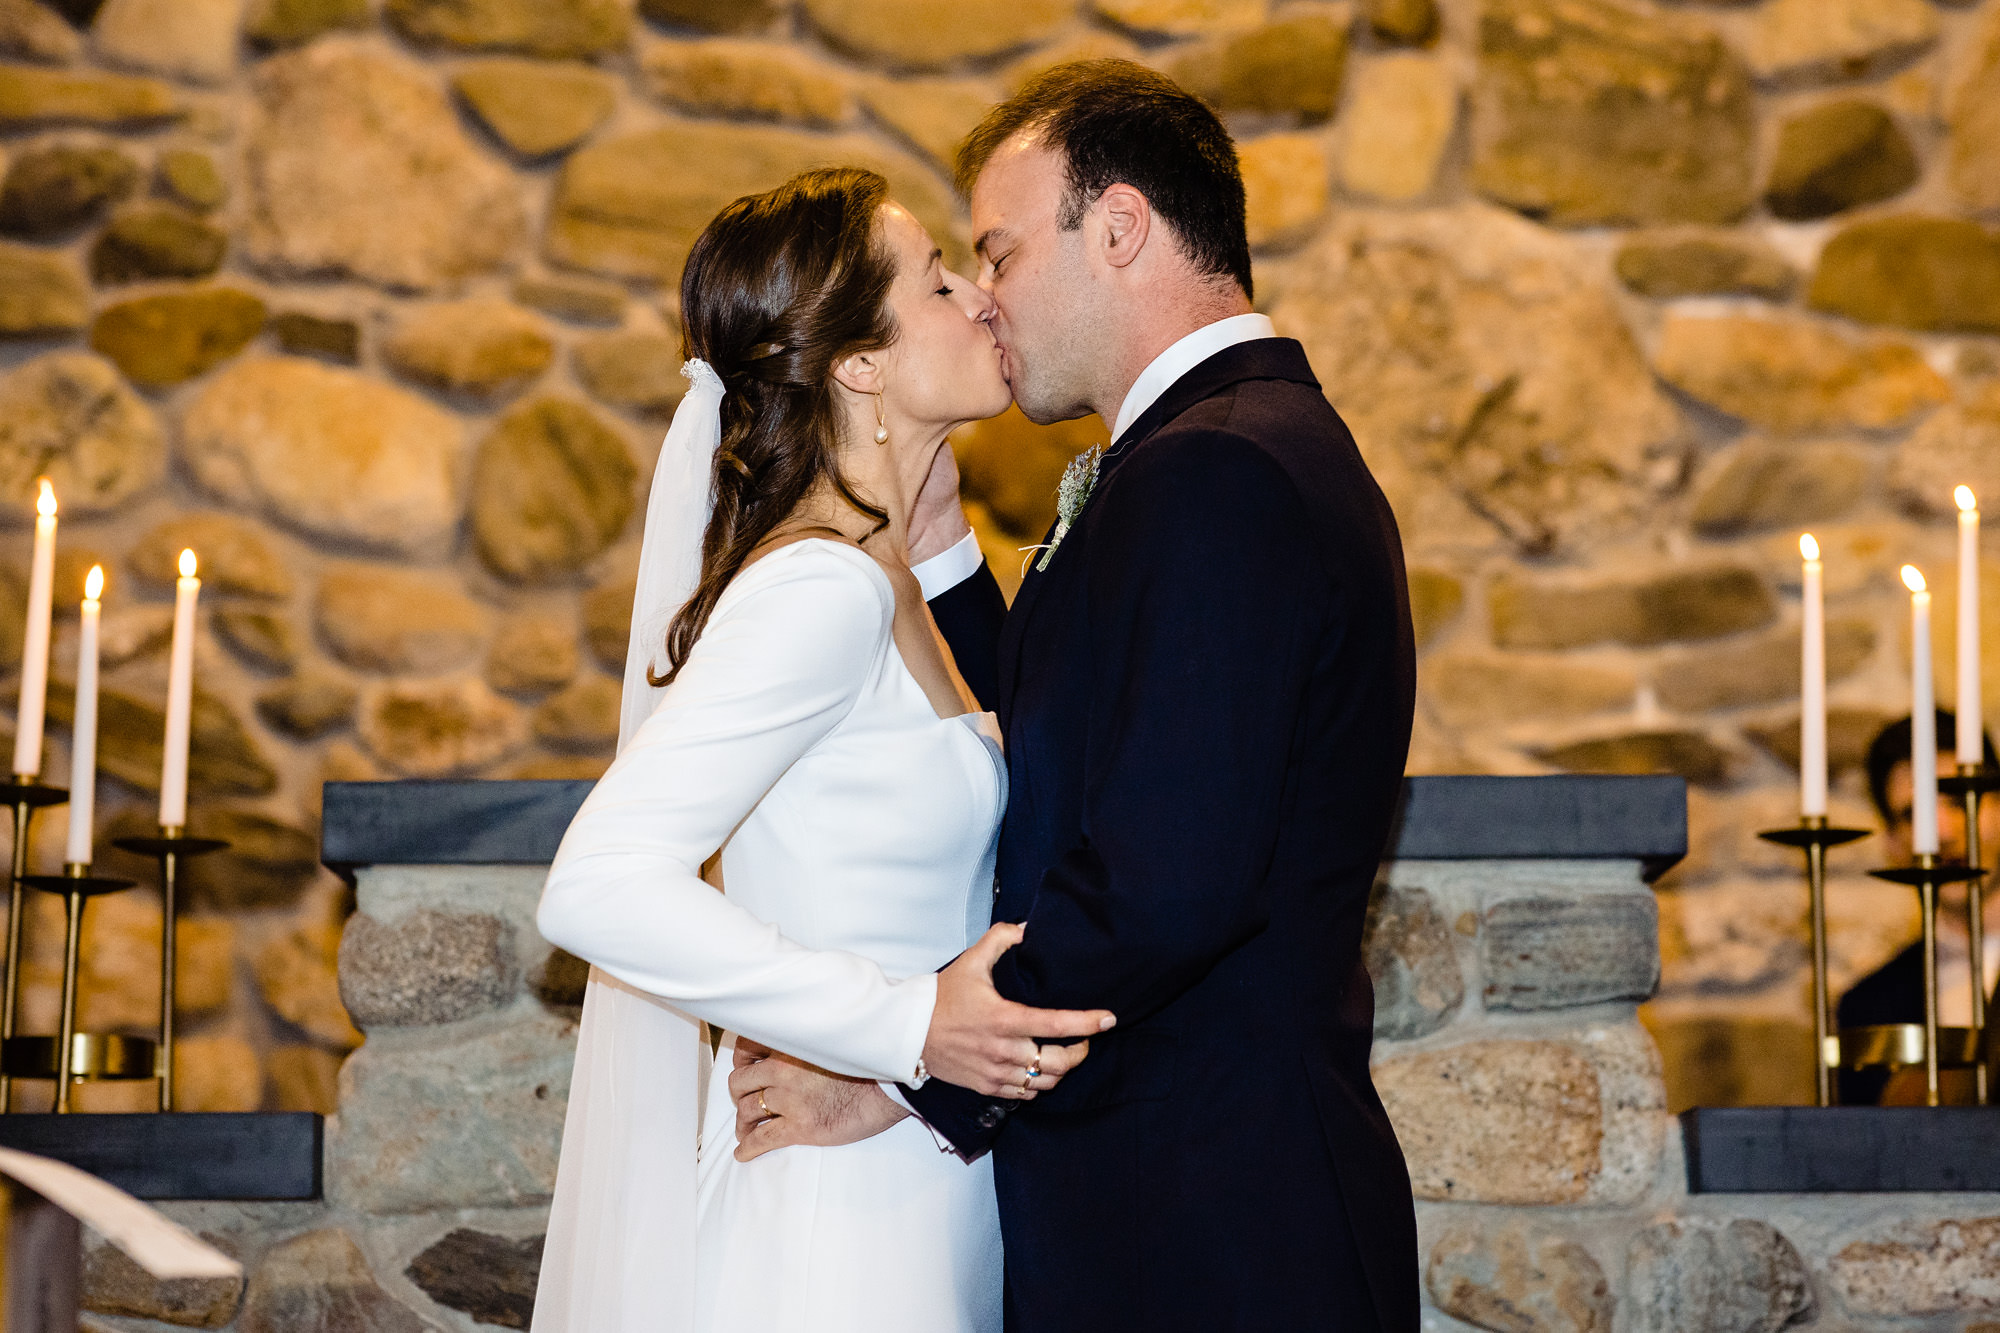 A first kiss at a Wilson Memorial Chapel wedding ceremony.